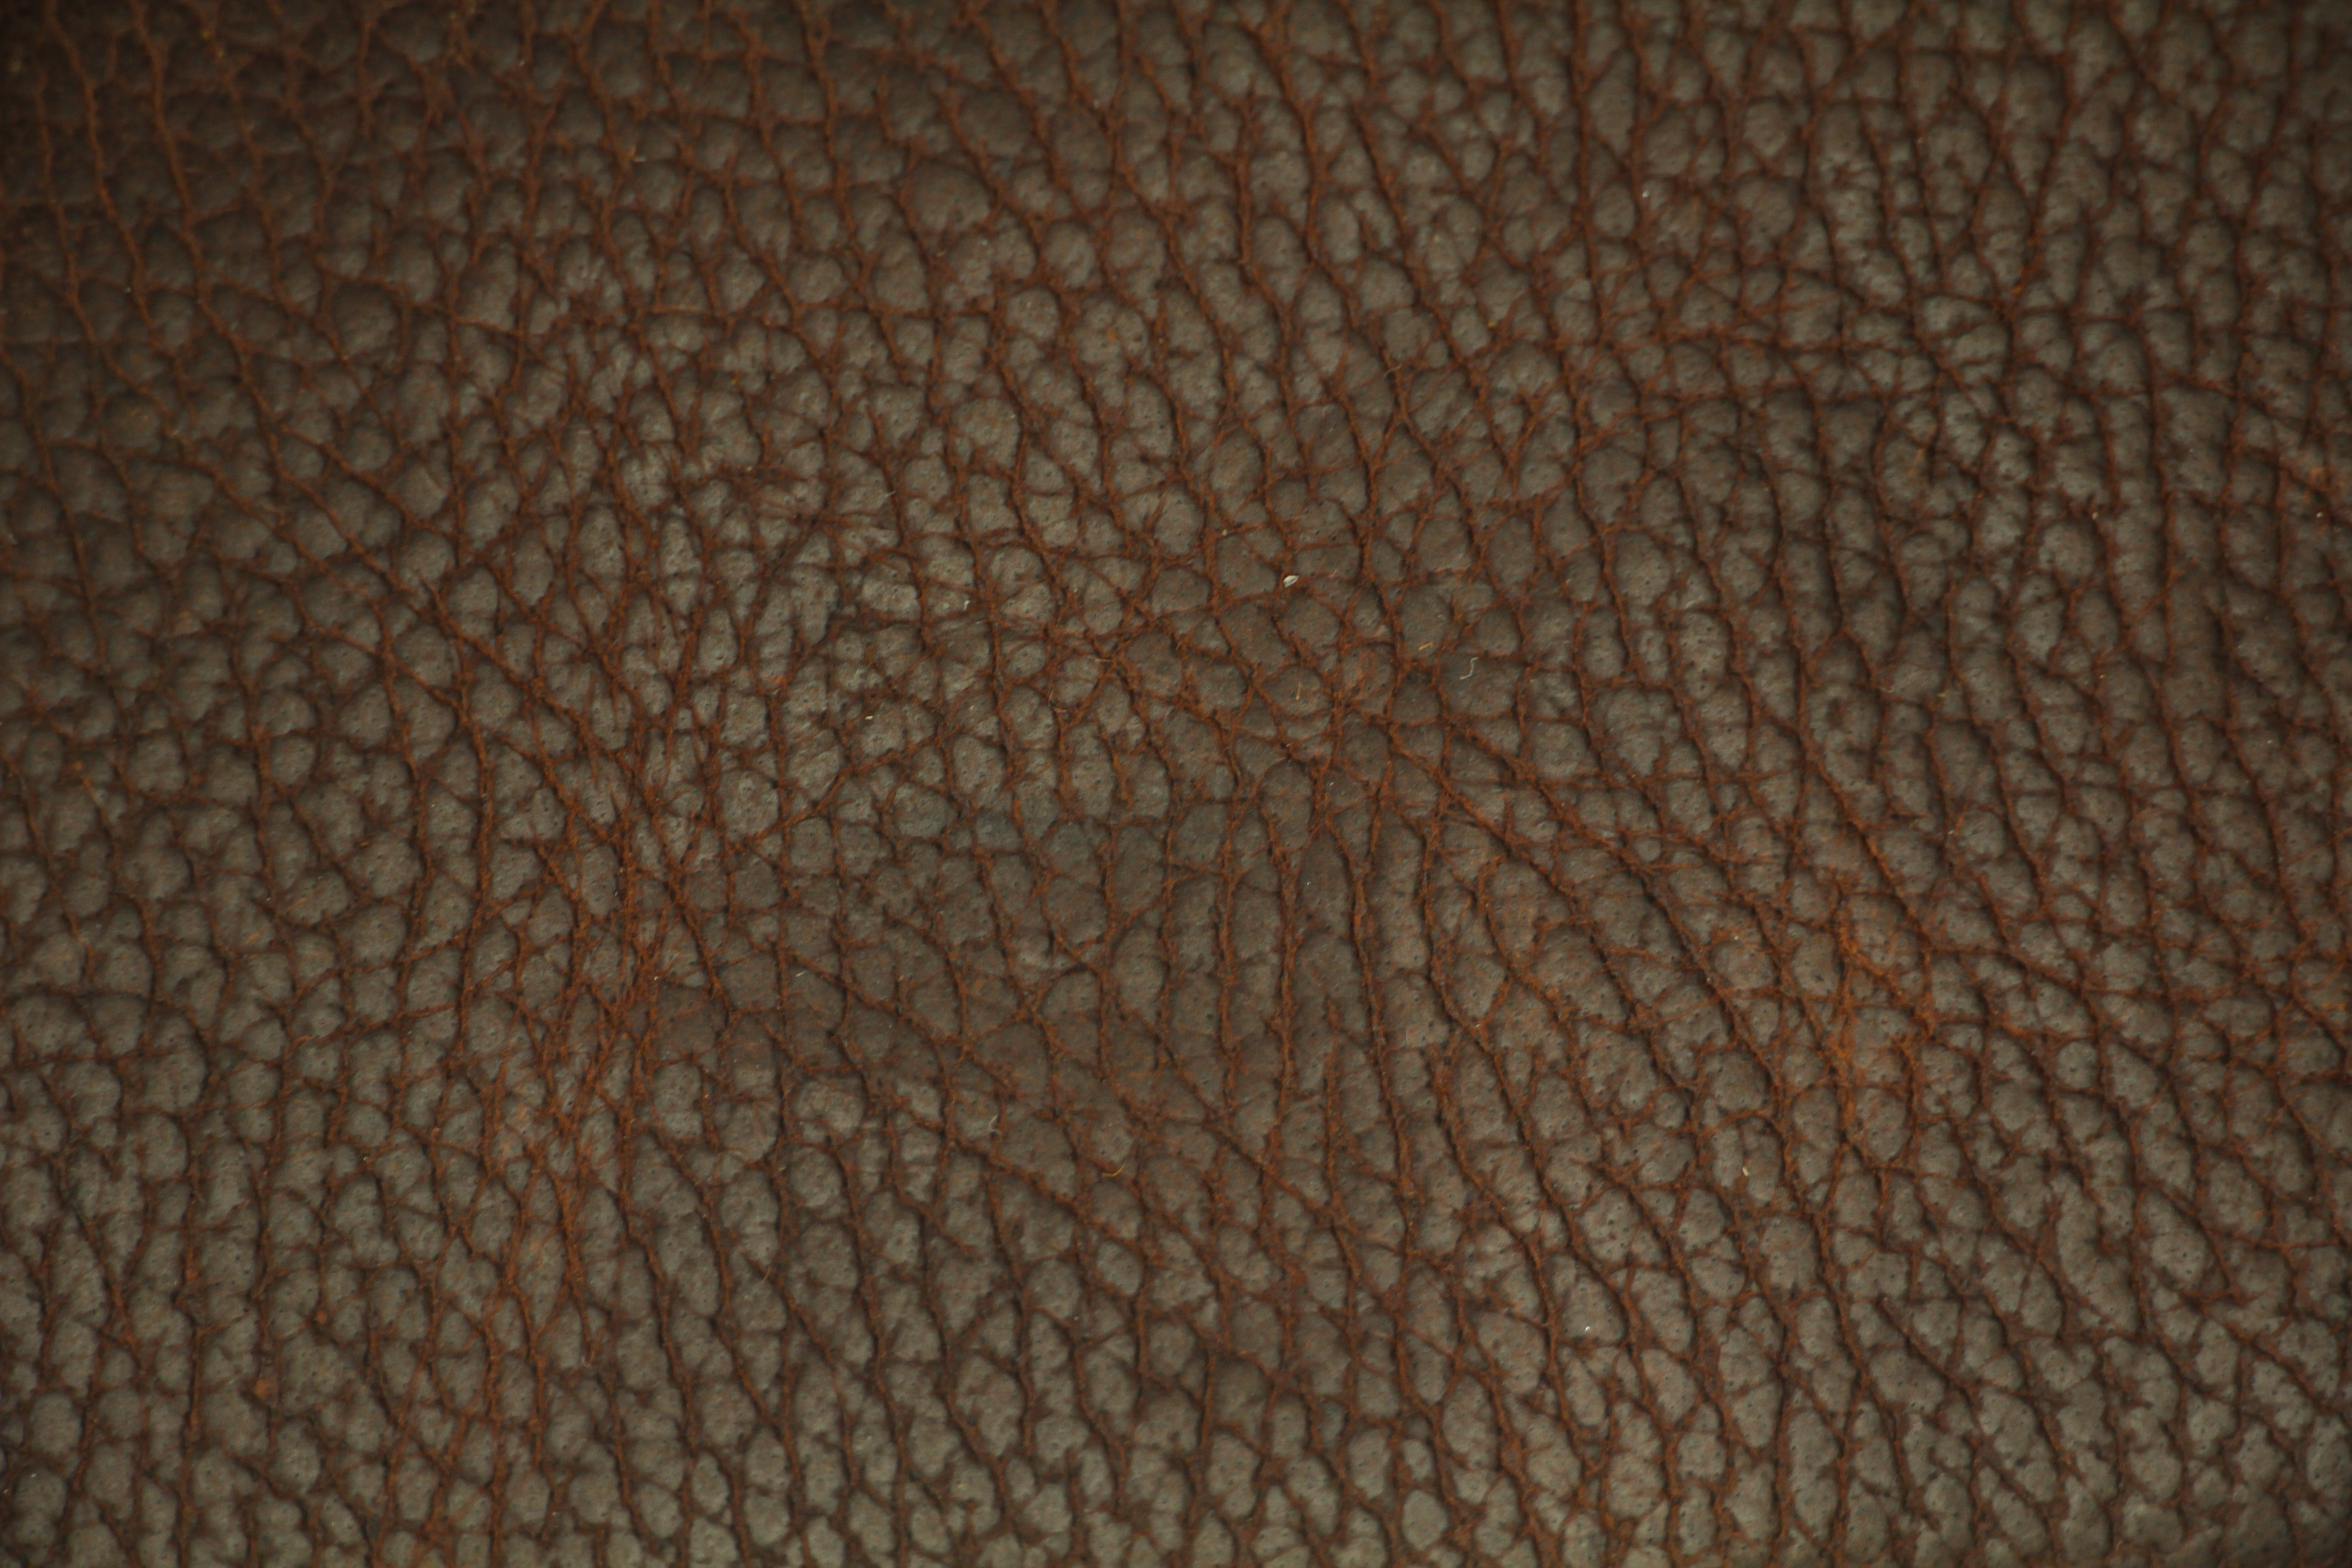 Cow leather texture photo